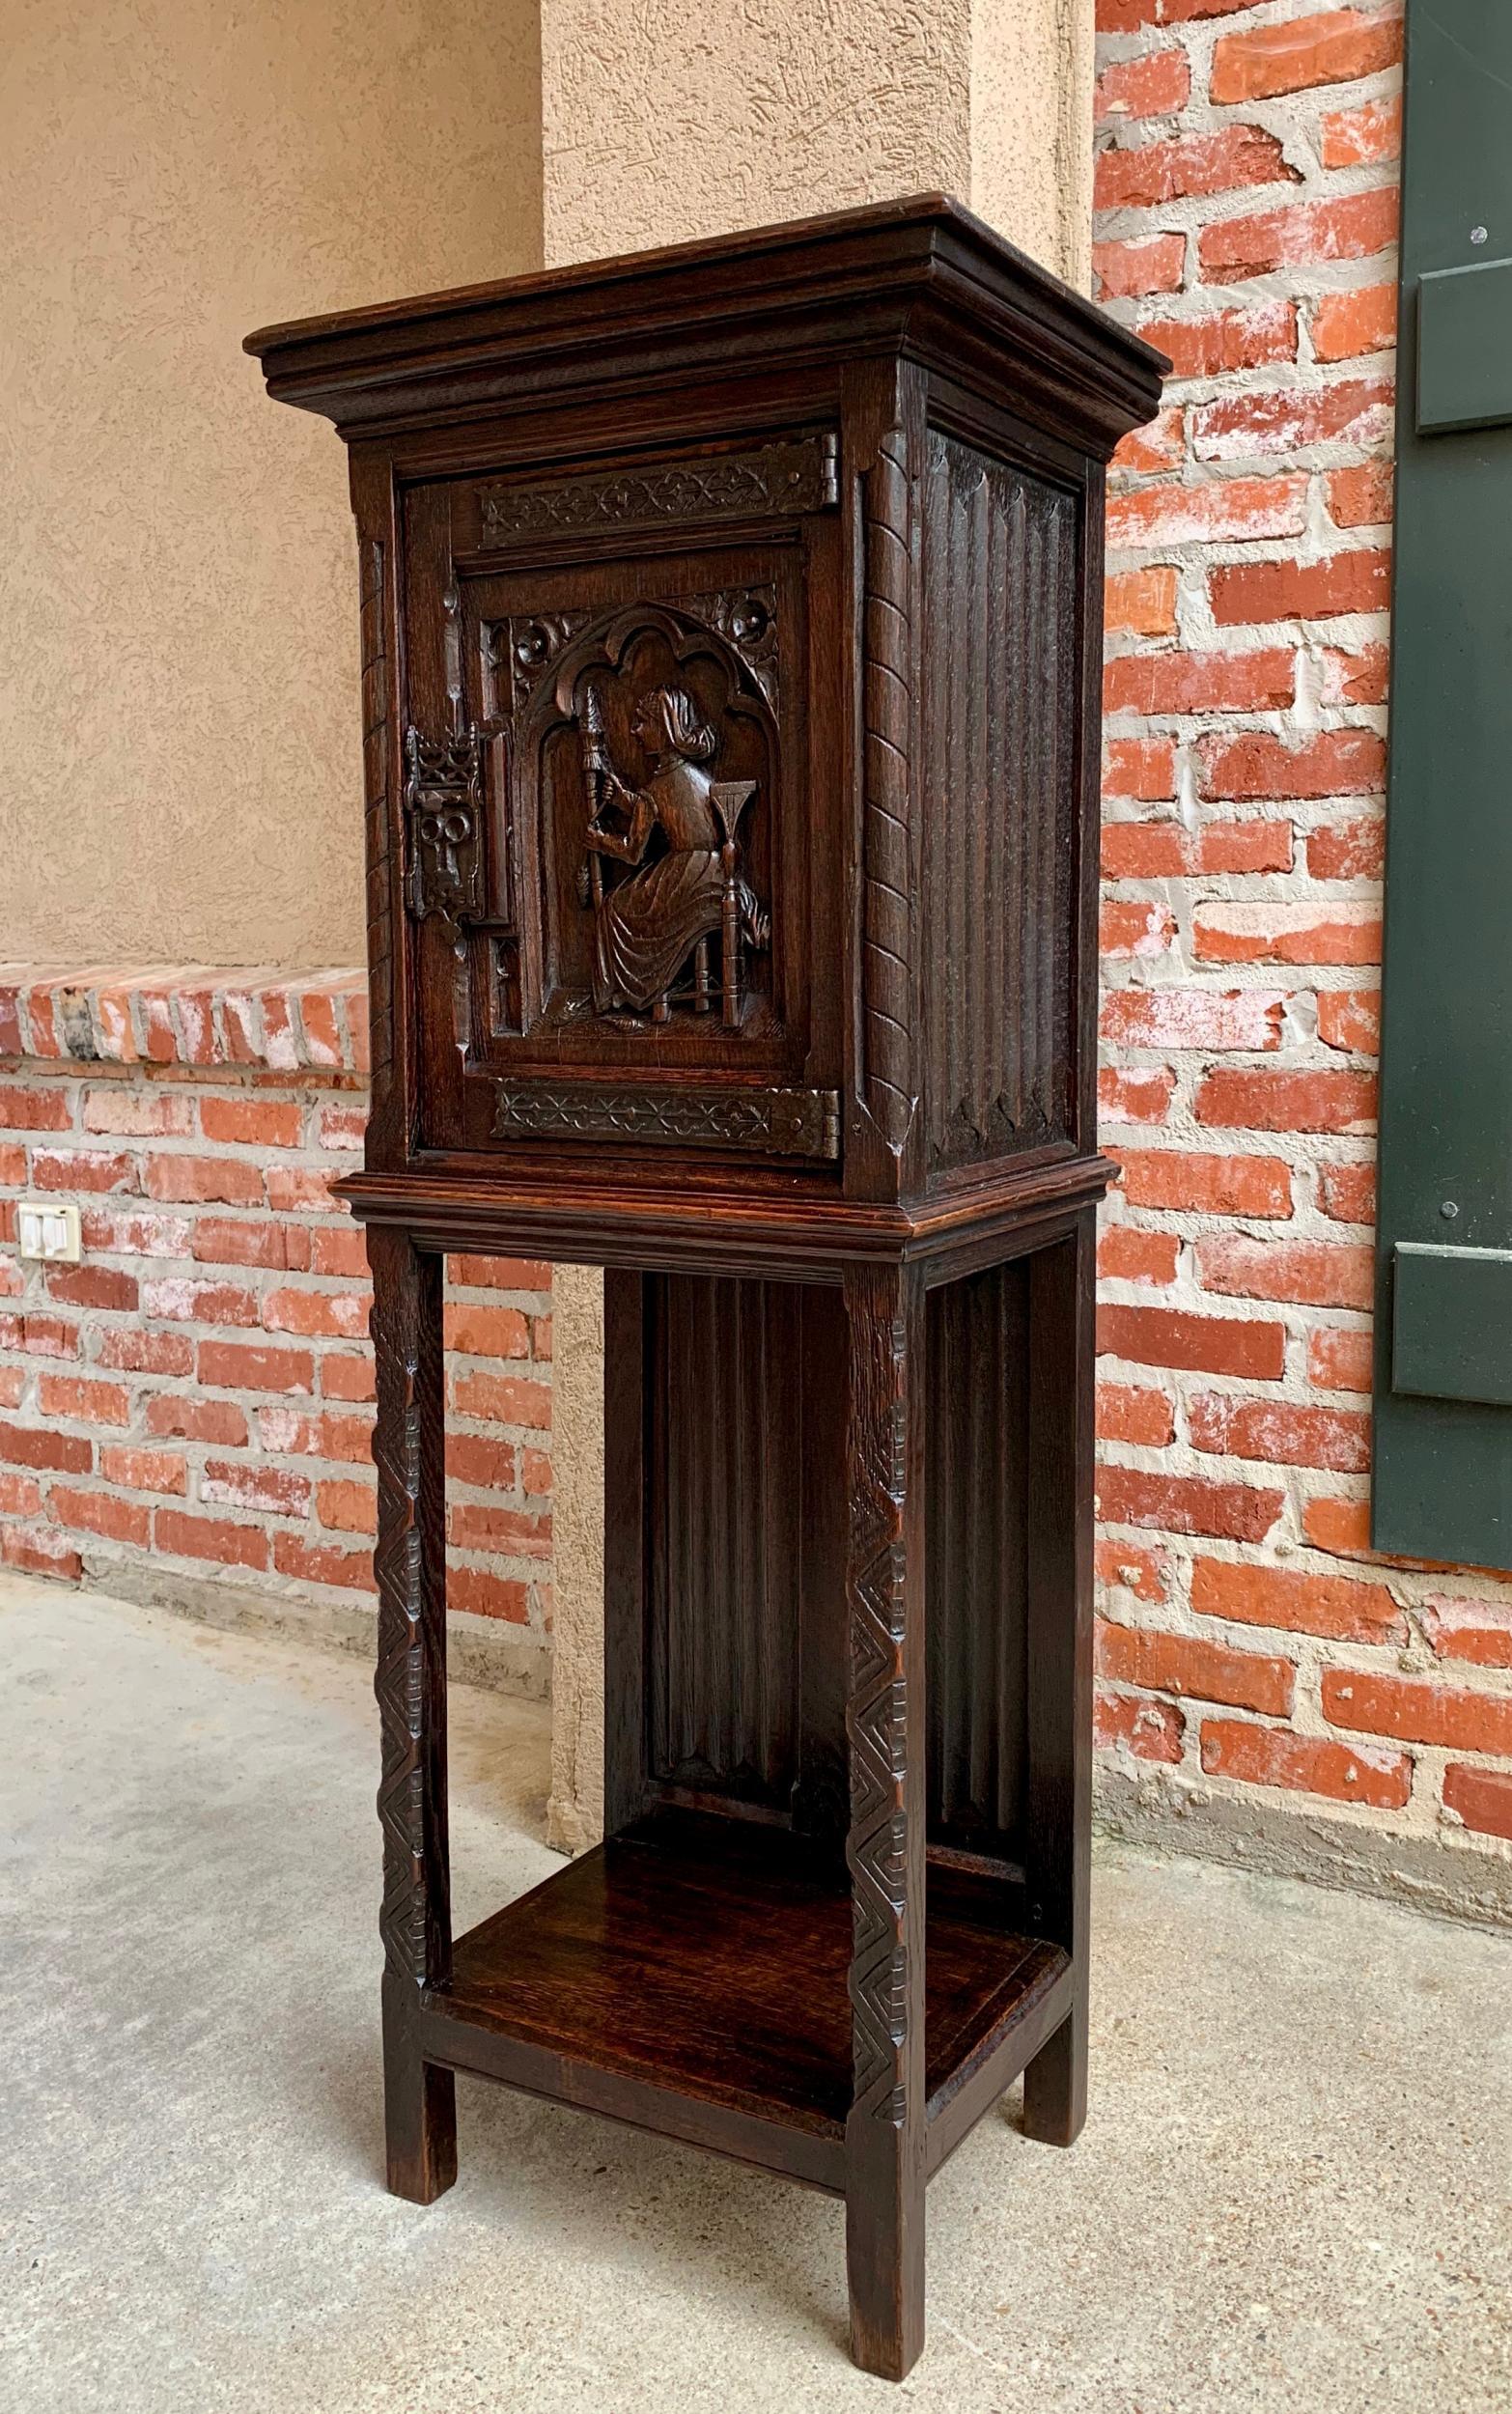 Petite Antique French Carved Oak Gothic Vestment Cabinet Display Bookcase 19th C For Sale 6